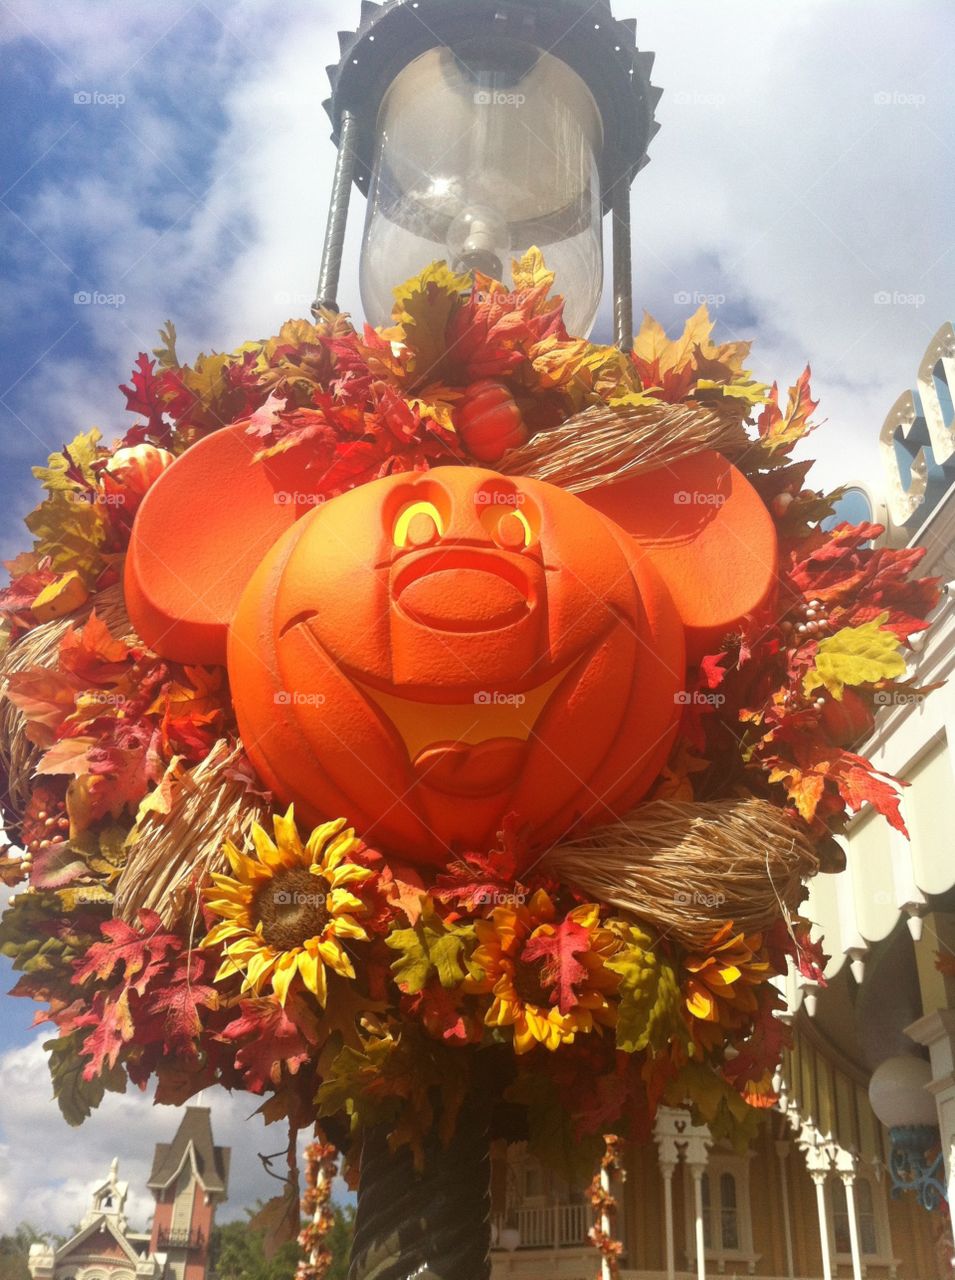 Mickey Pumpkin. One of many pumpkin decorations in Disney World made to look like Mickey Mouse.